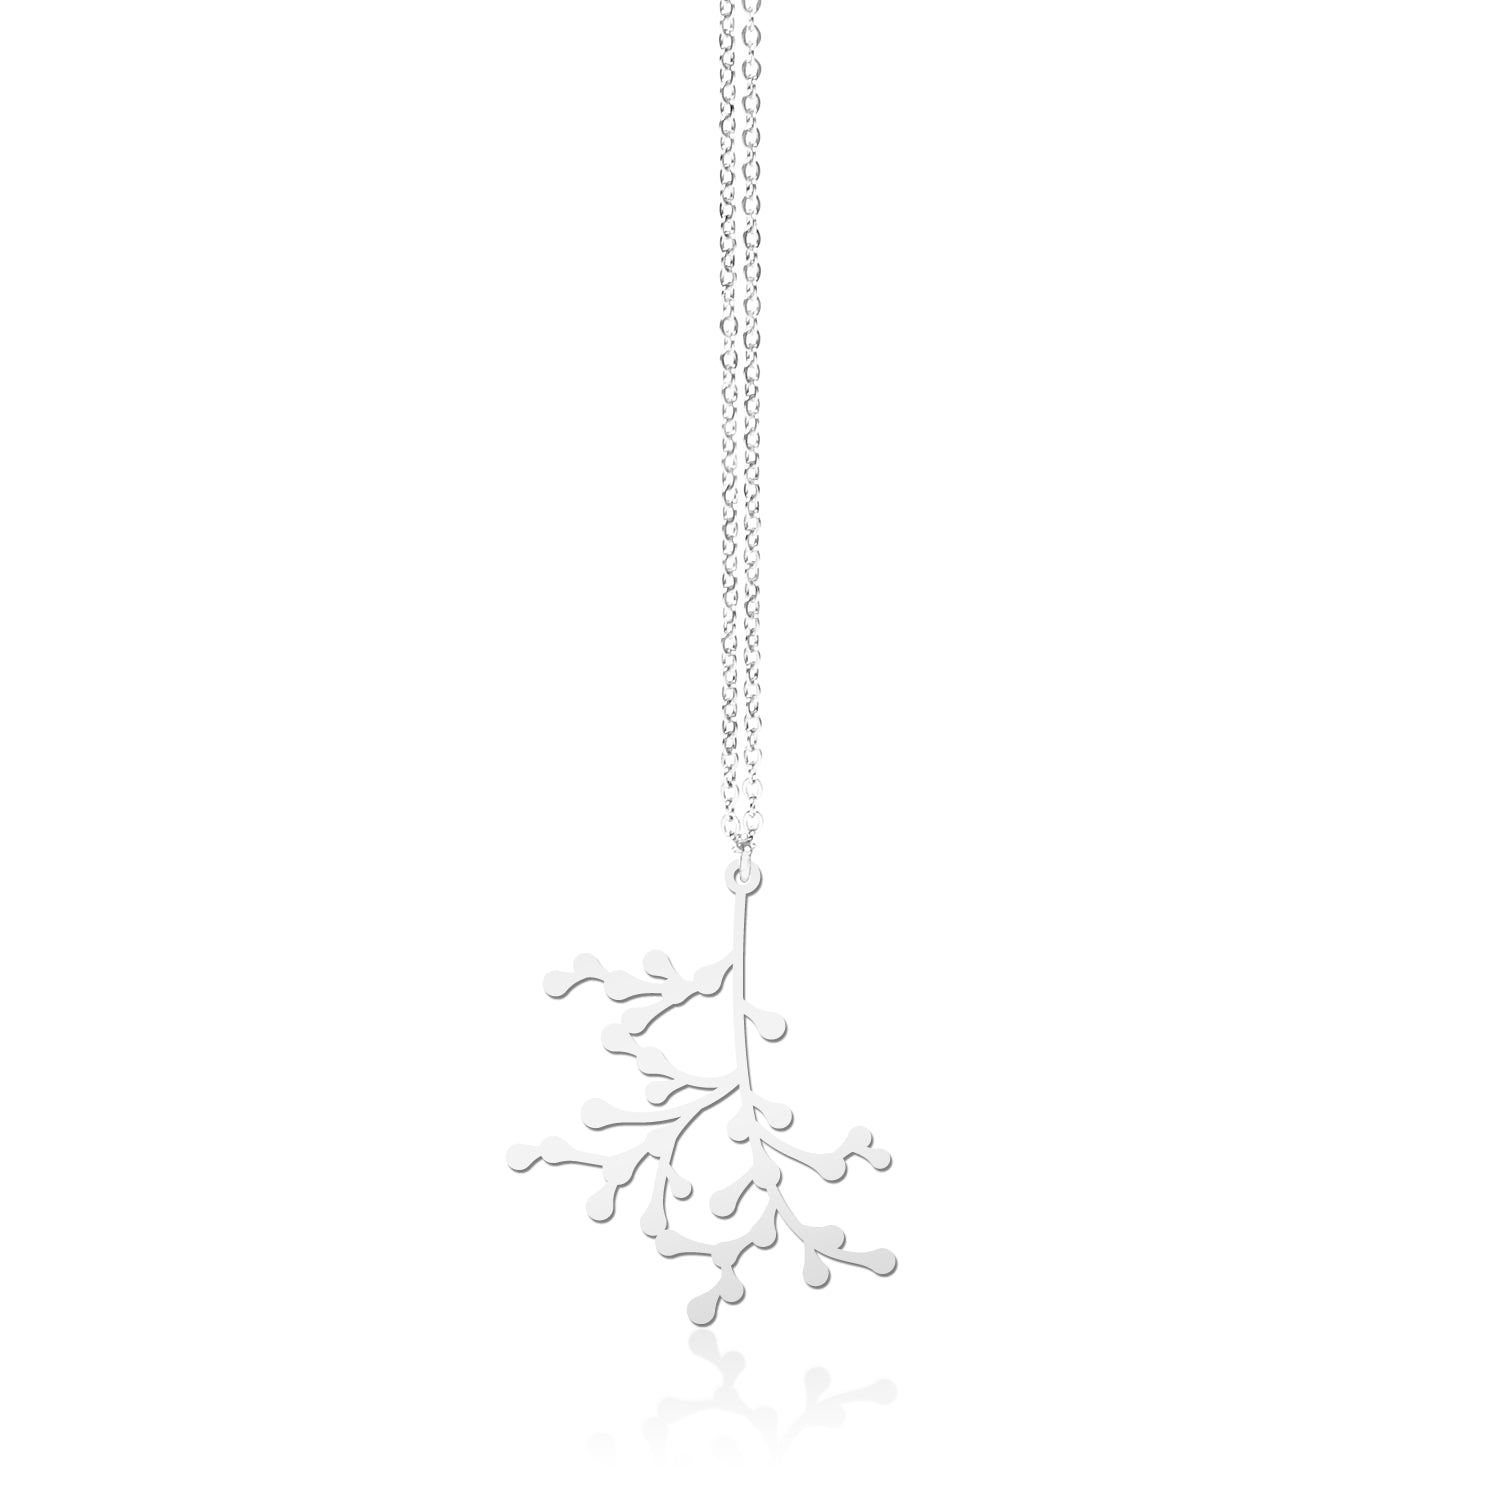 SEEDED EUCALYPTUS PENDANT SMALL SILVER WITH CHAIN